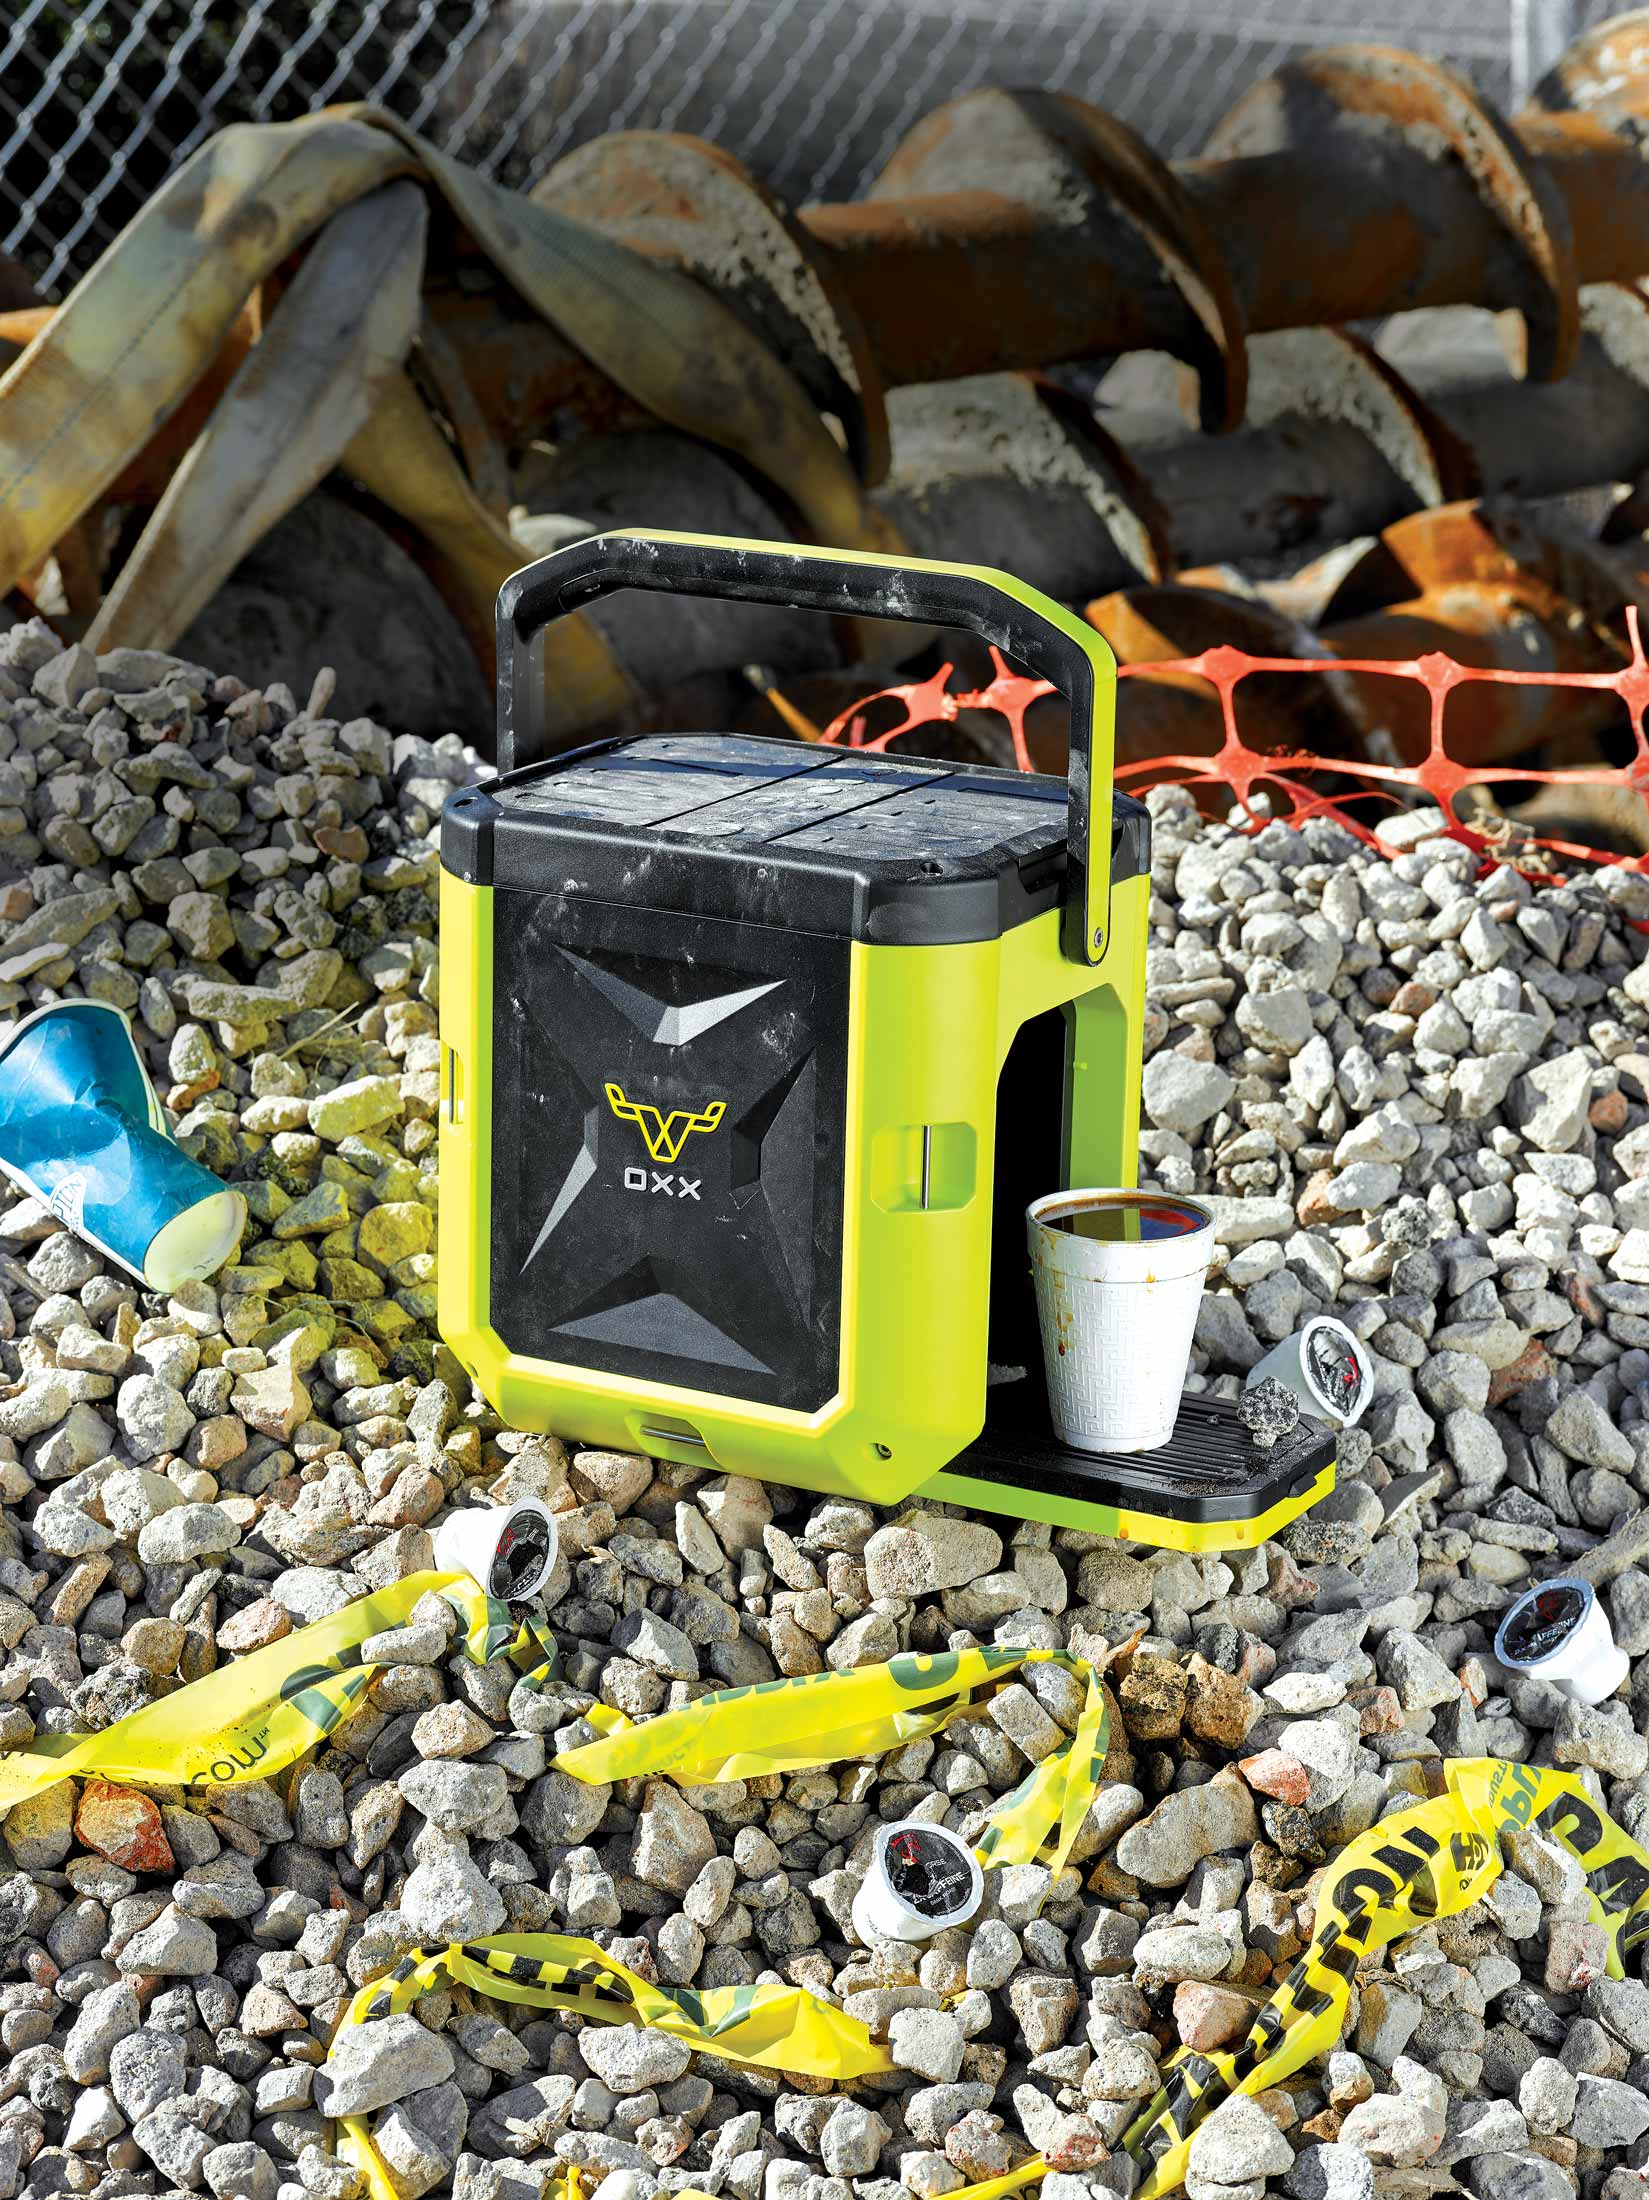 OXX Coffeeboxx - The World's Toughest Coffee Maker!